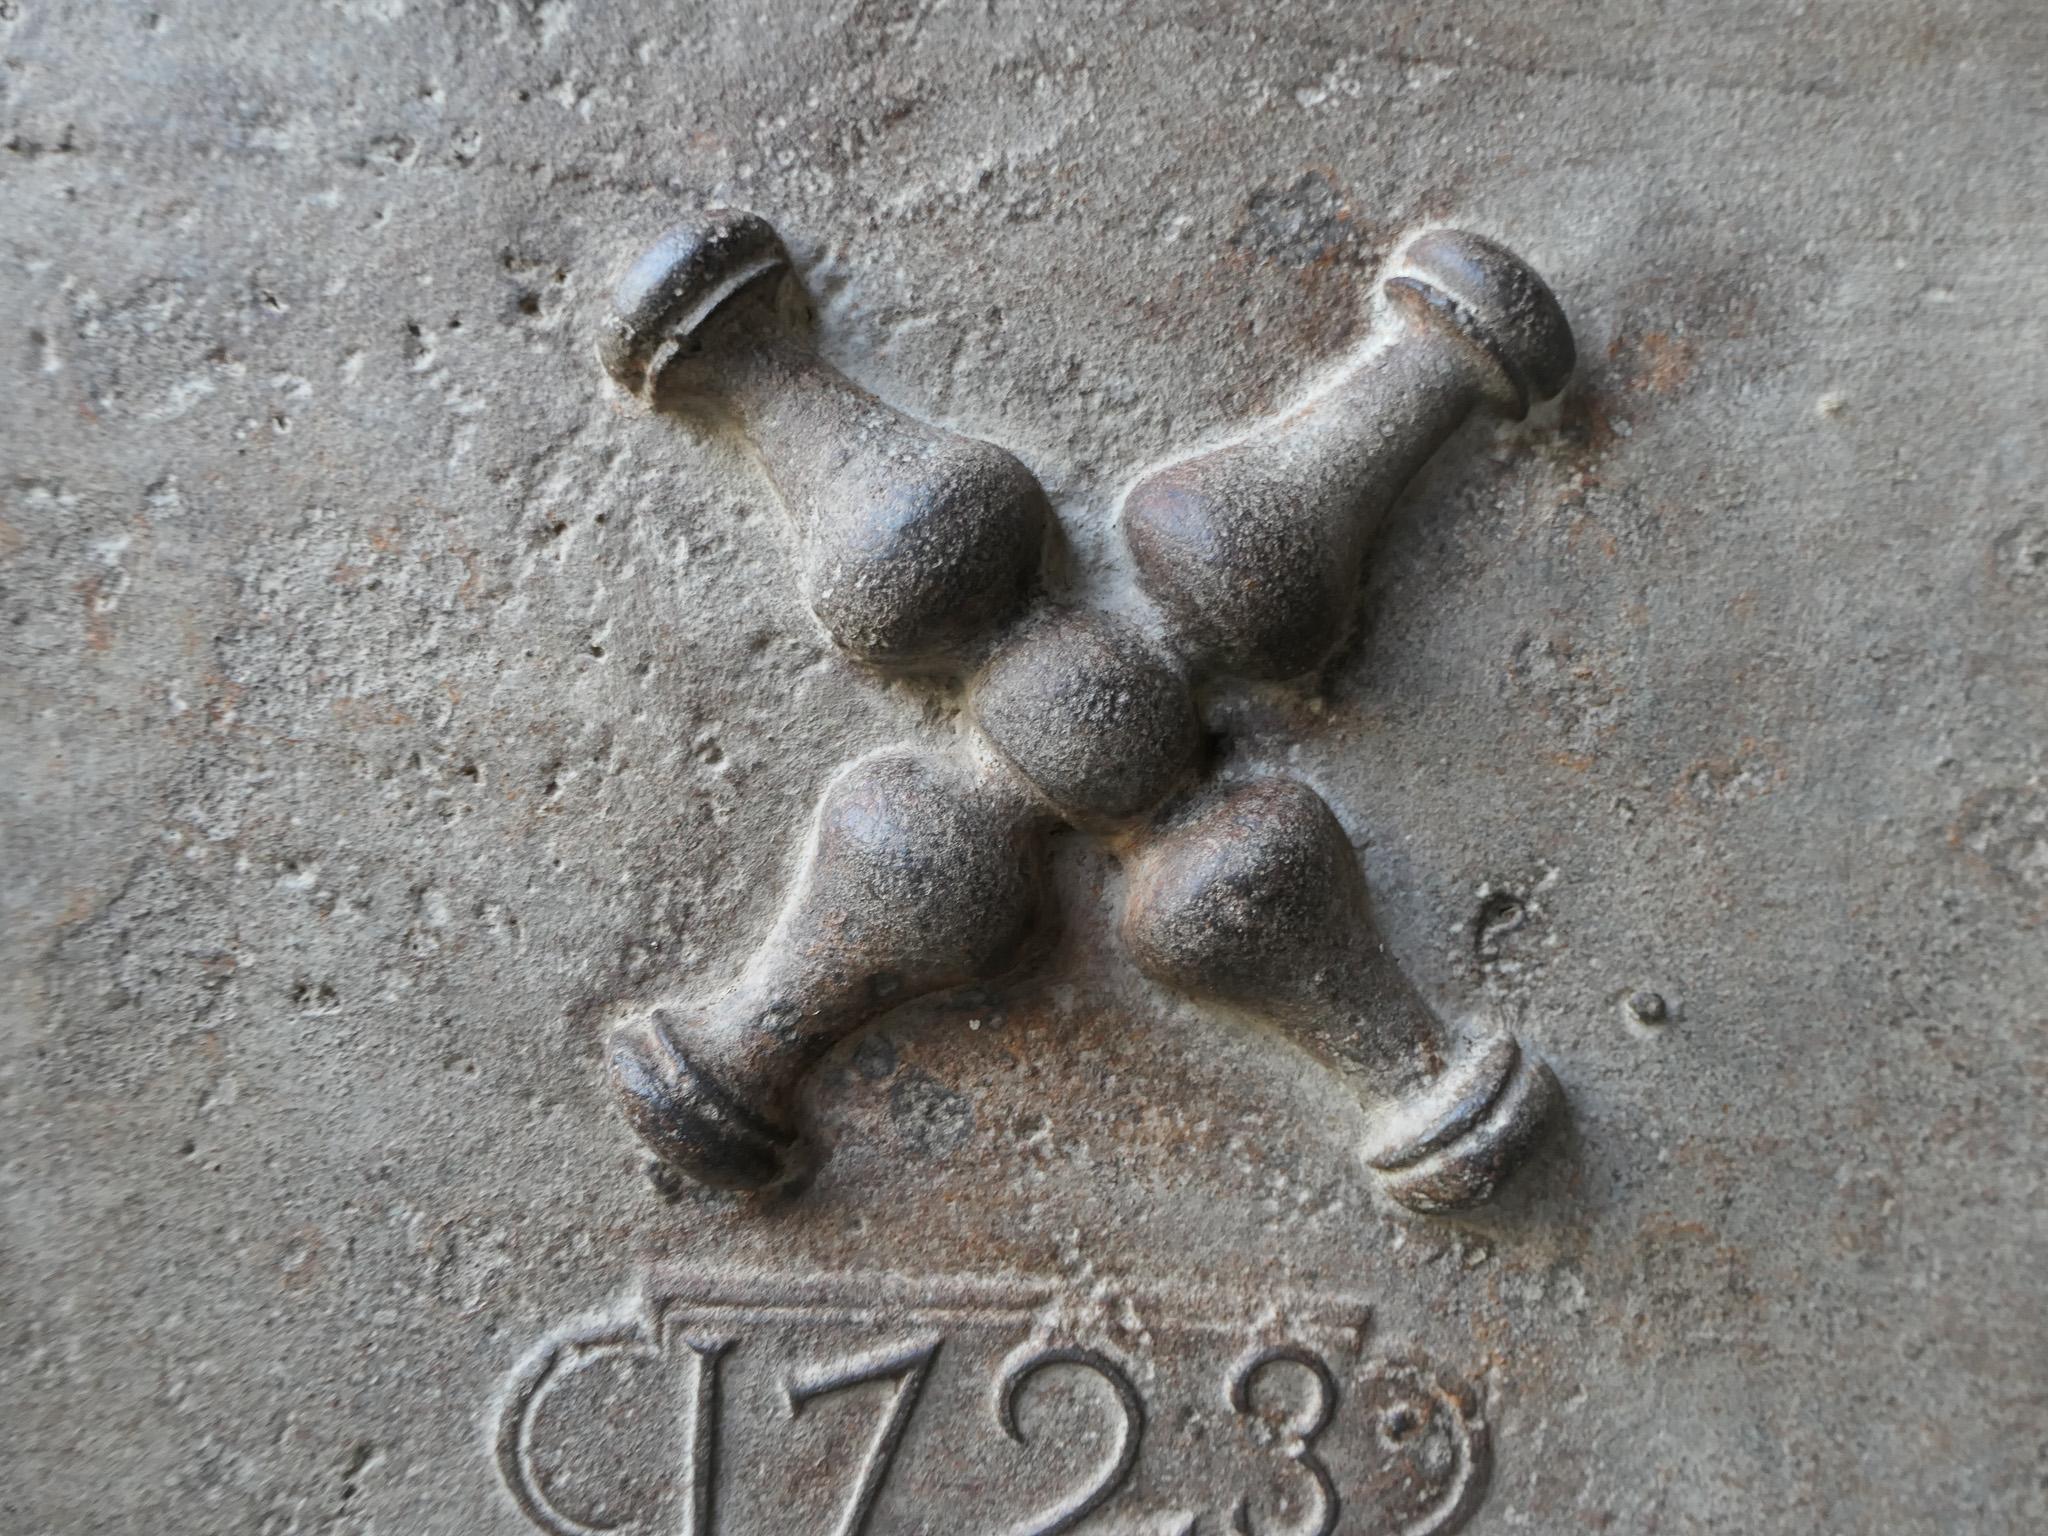 18th century French fireback with a Saint Andrew's cross and two pillars of Hercules. Saint Andrew is said to have been martyred on a cross in this shape. As a result the cross became a sign for humility and sacrifice. The pillars of Hercules